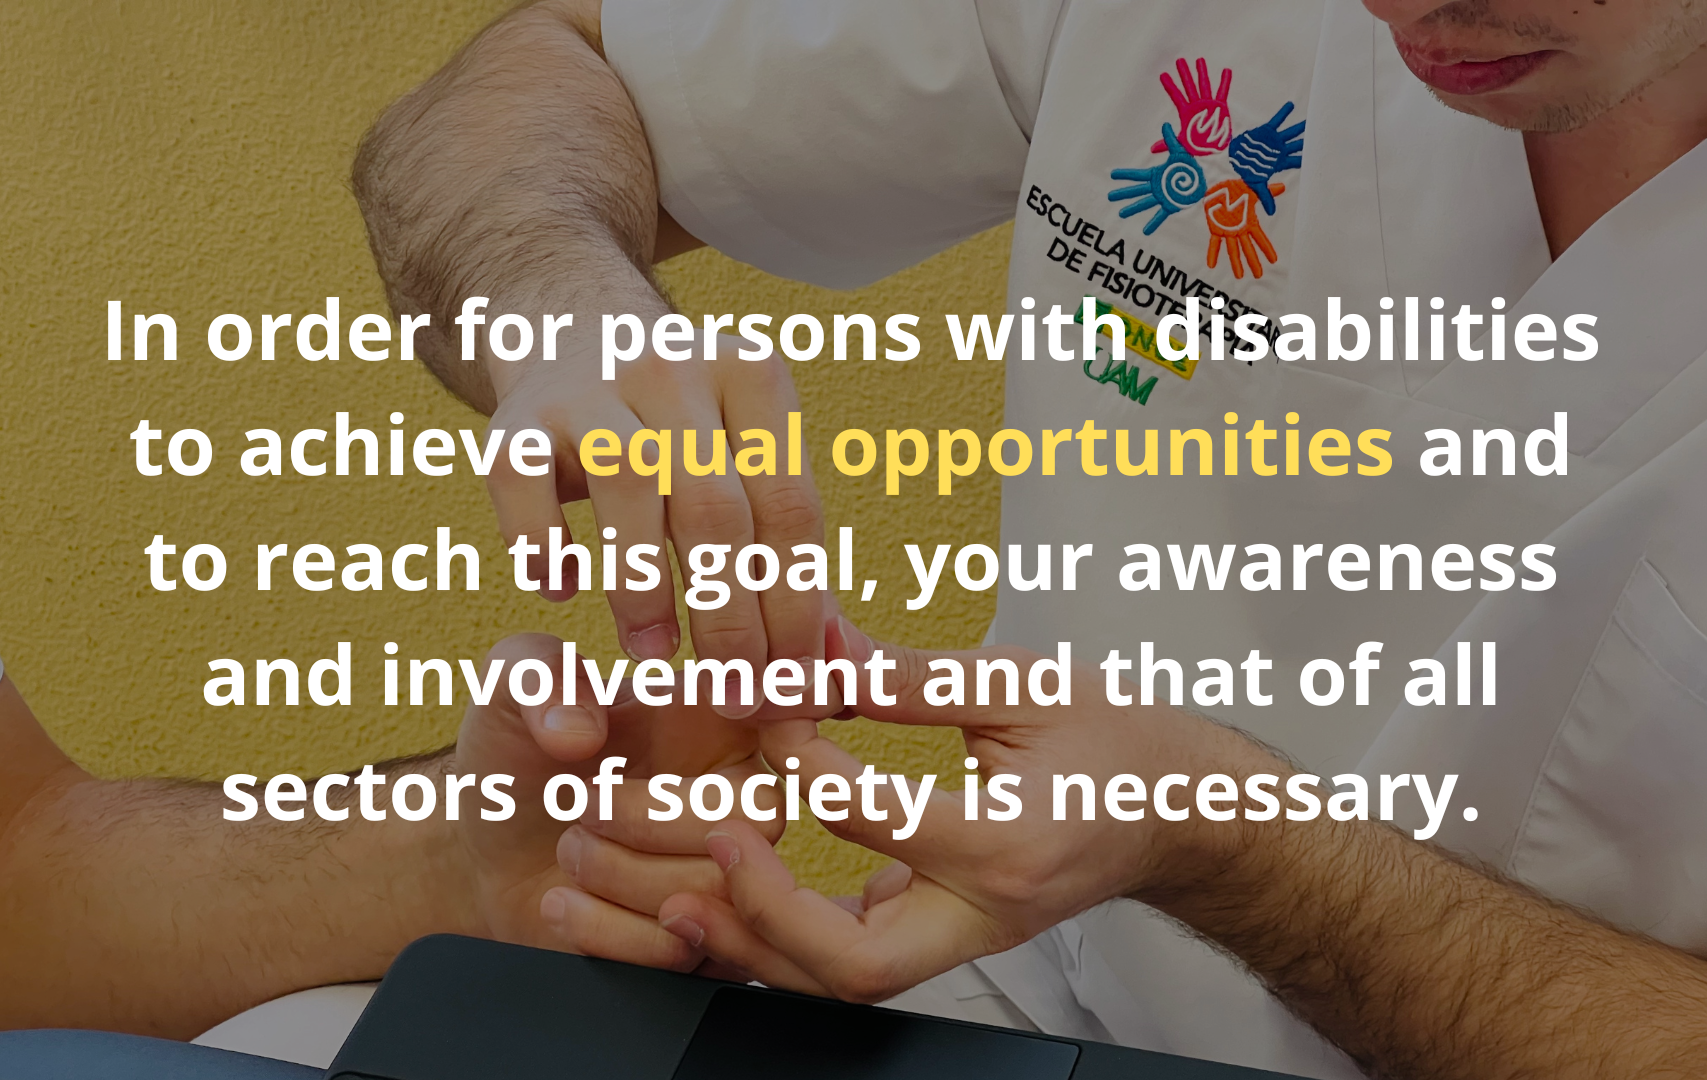 In order for persons with disabilities to achieve equal opportunities and to reach this goal, your awareness and involvement and that of all sectors of society is necessary.